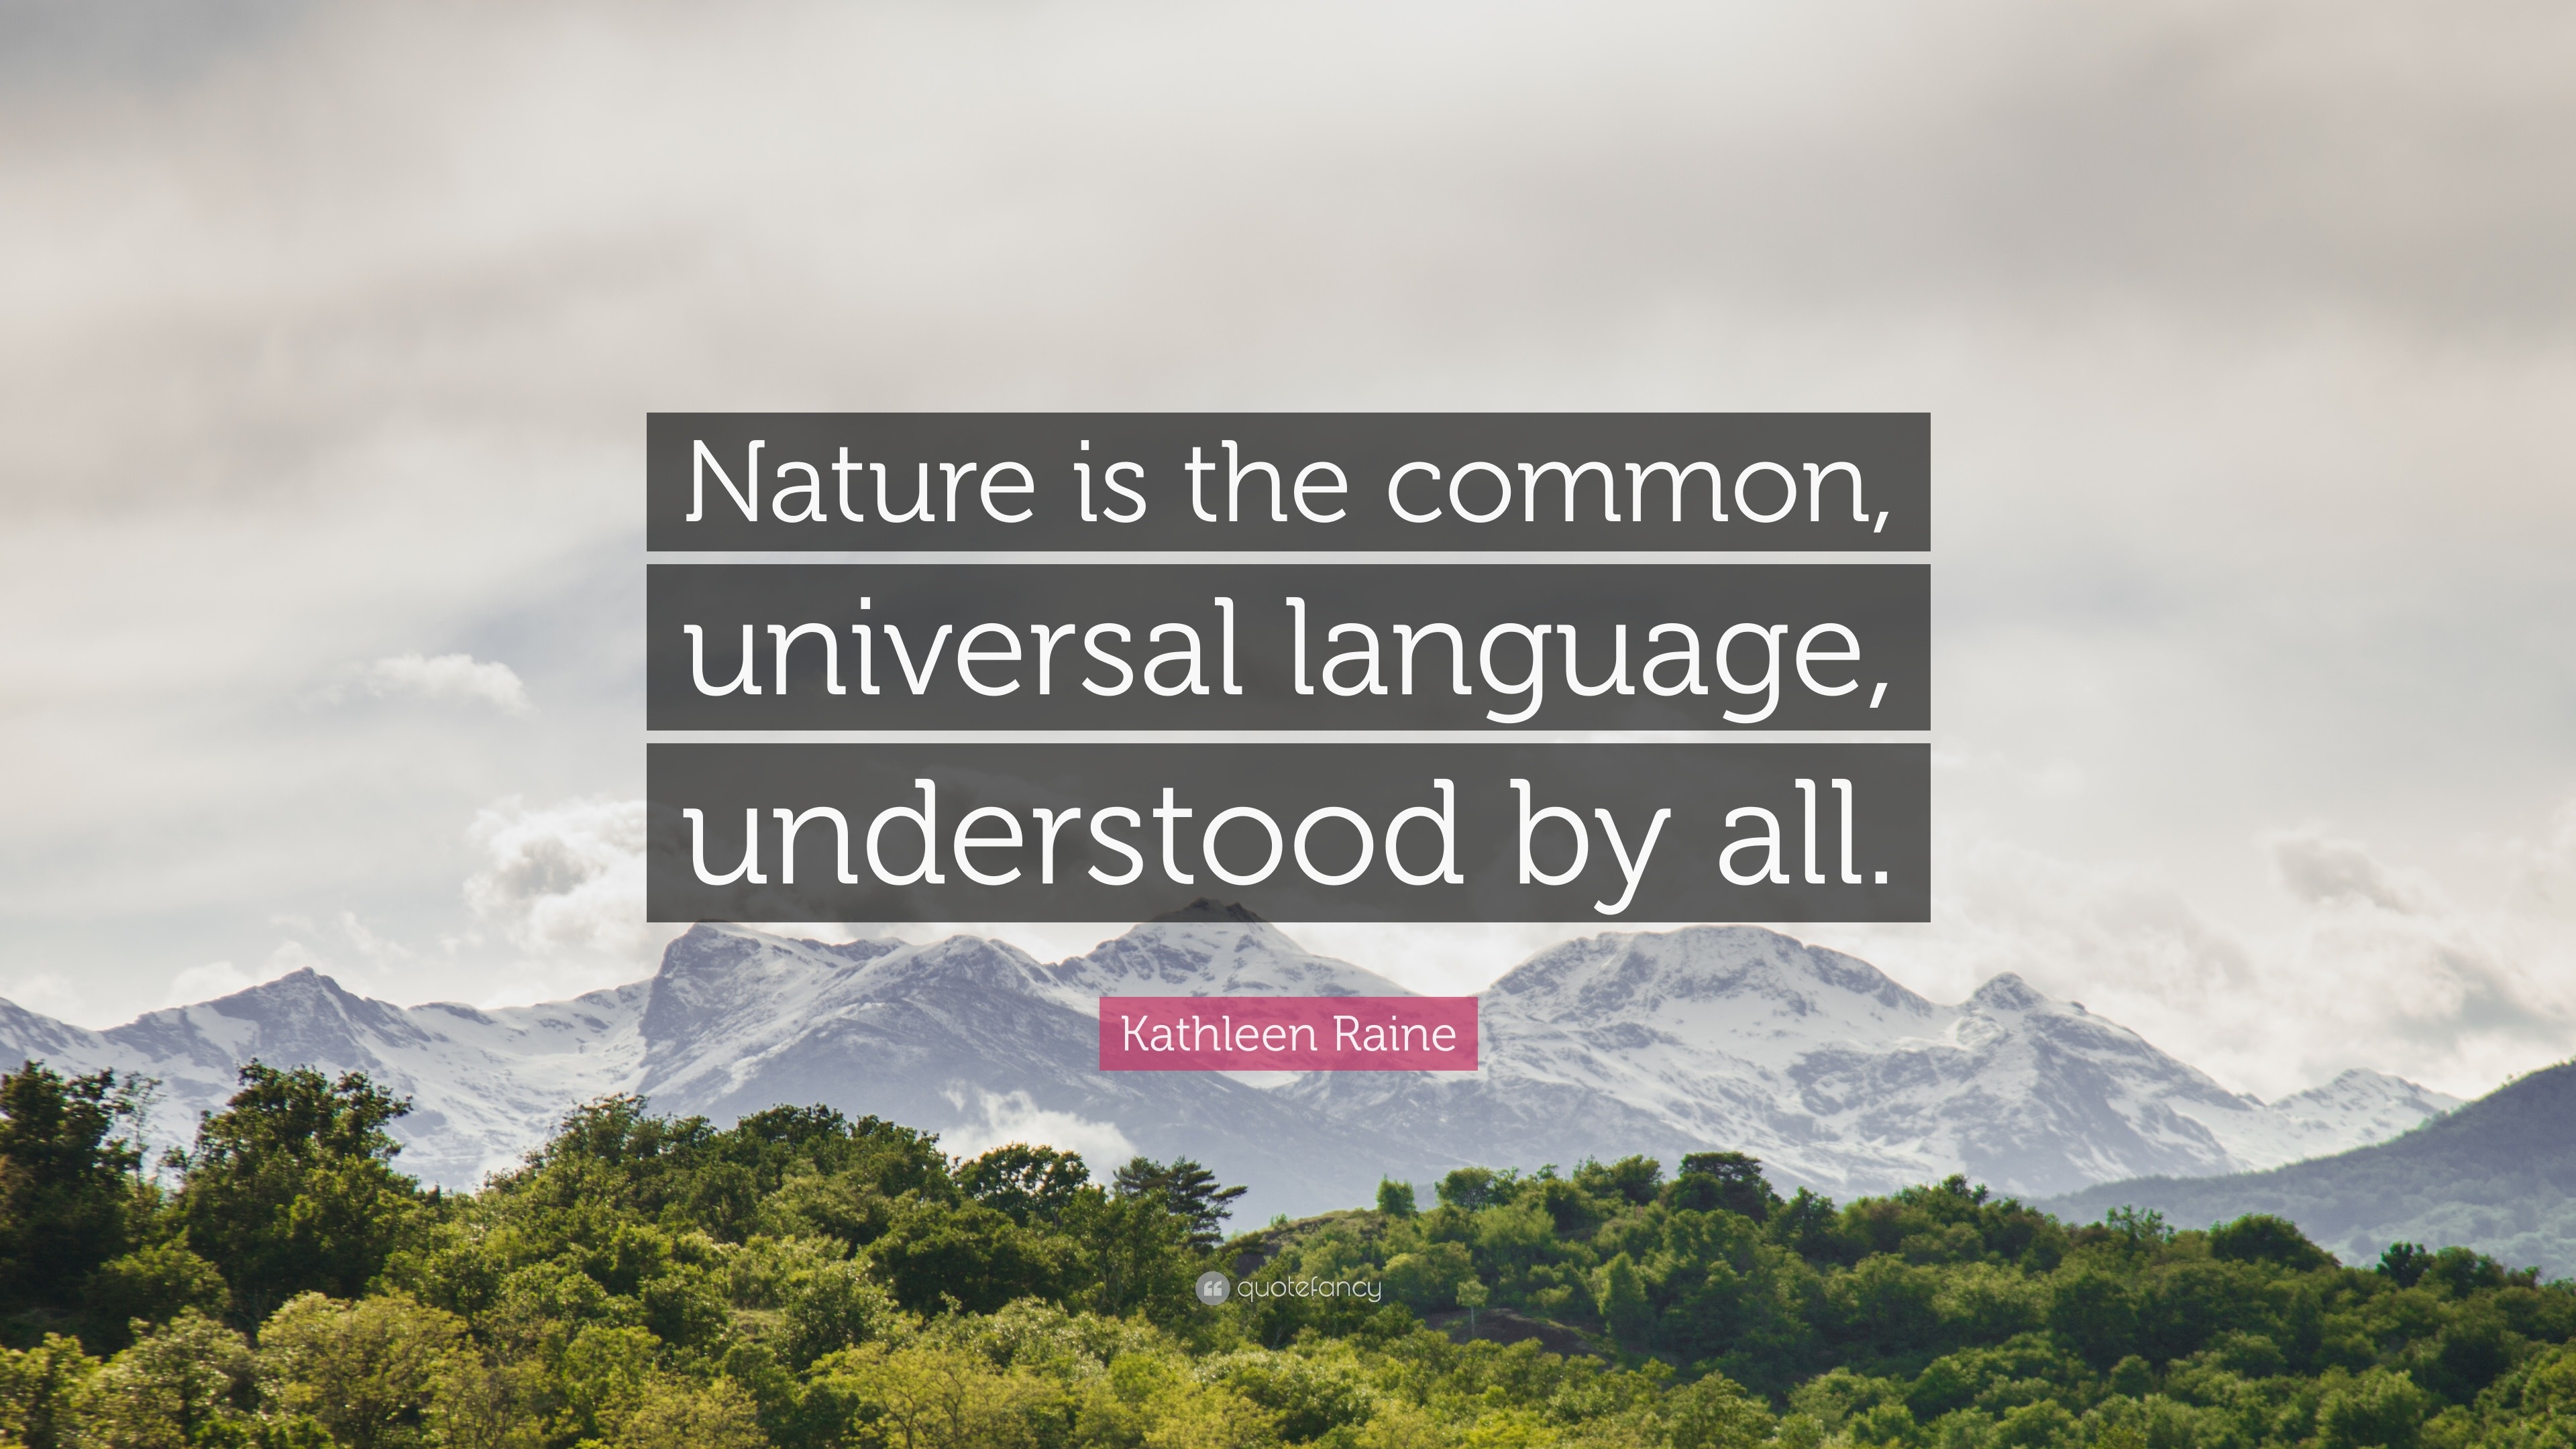 Kathleen Raine Quote: “Nature is the universal language, understood by all.”